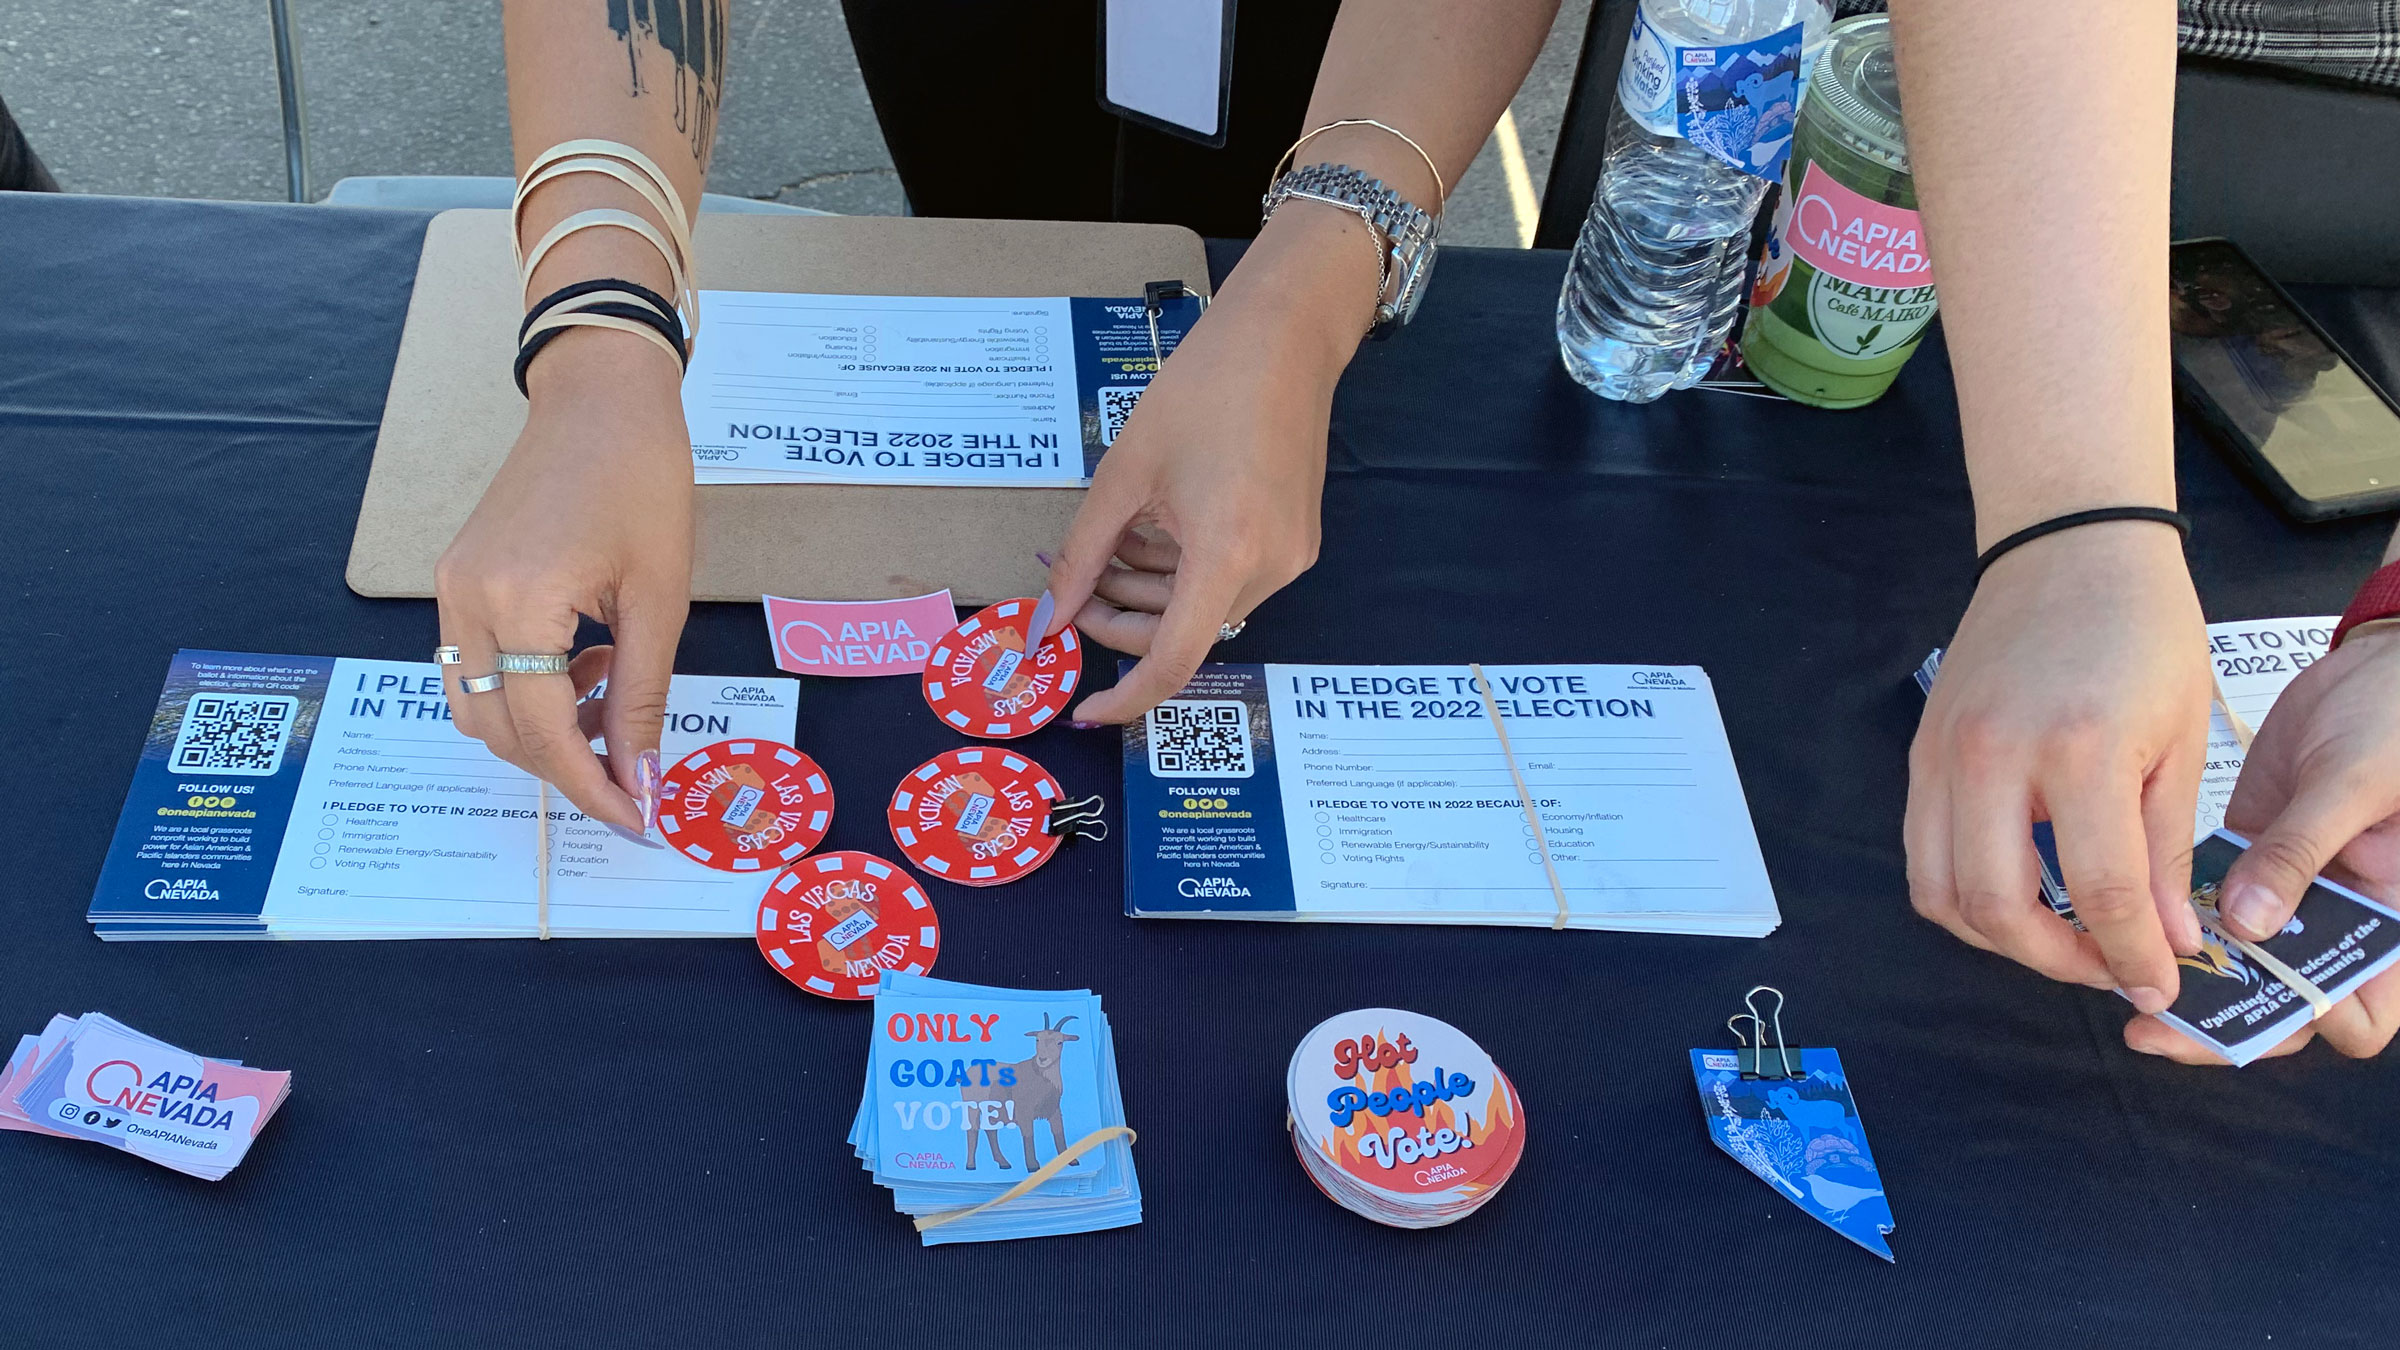 Voting stickers are handed out in Las Vegas at an event trying to mobilize Asian and Pacific Islander voters.